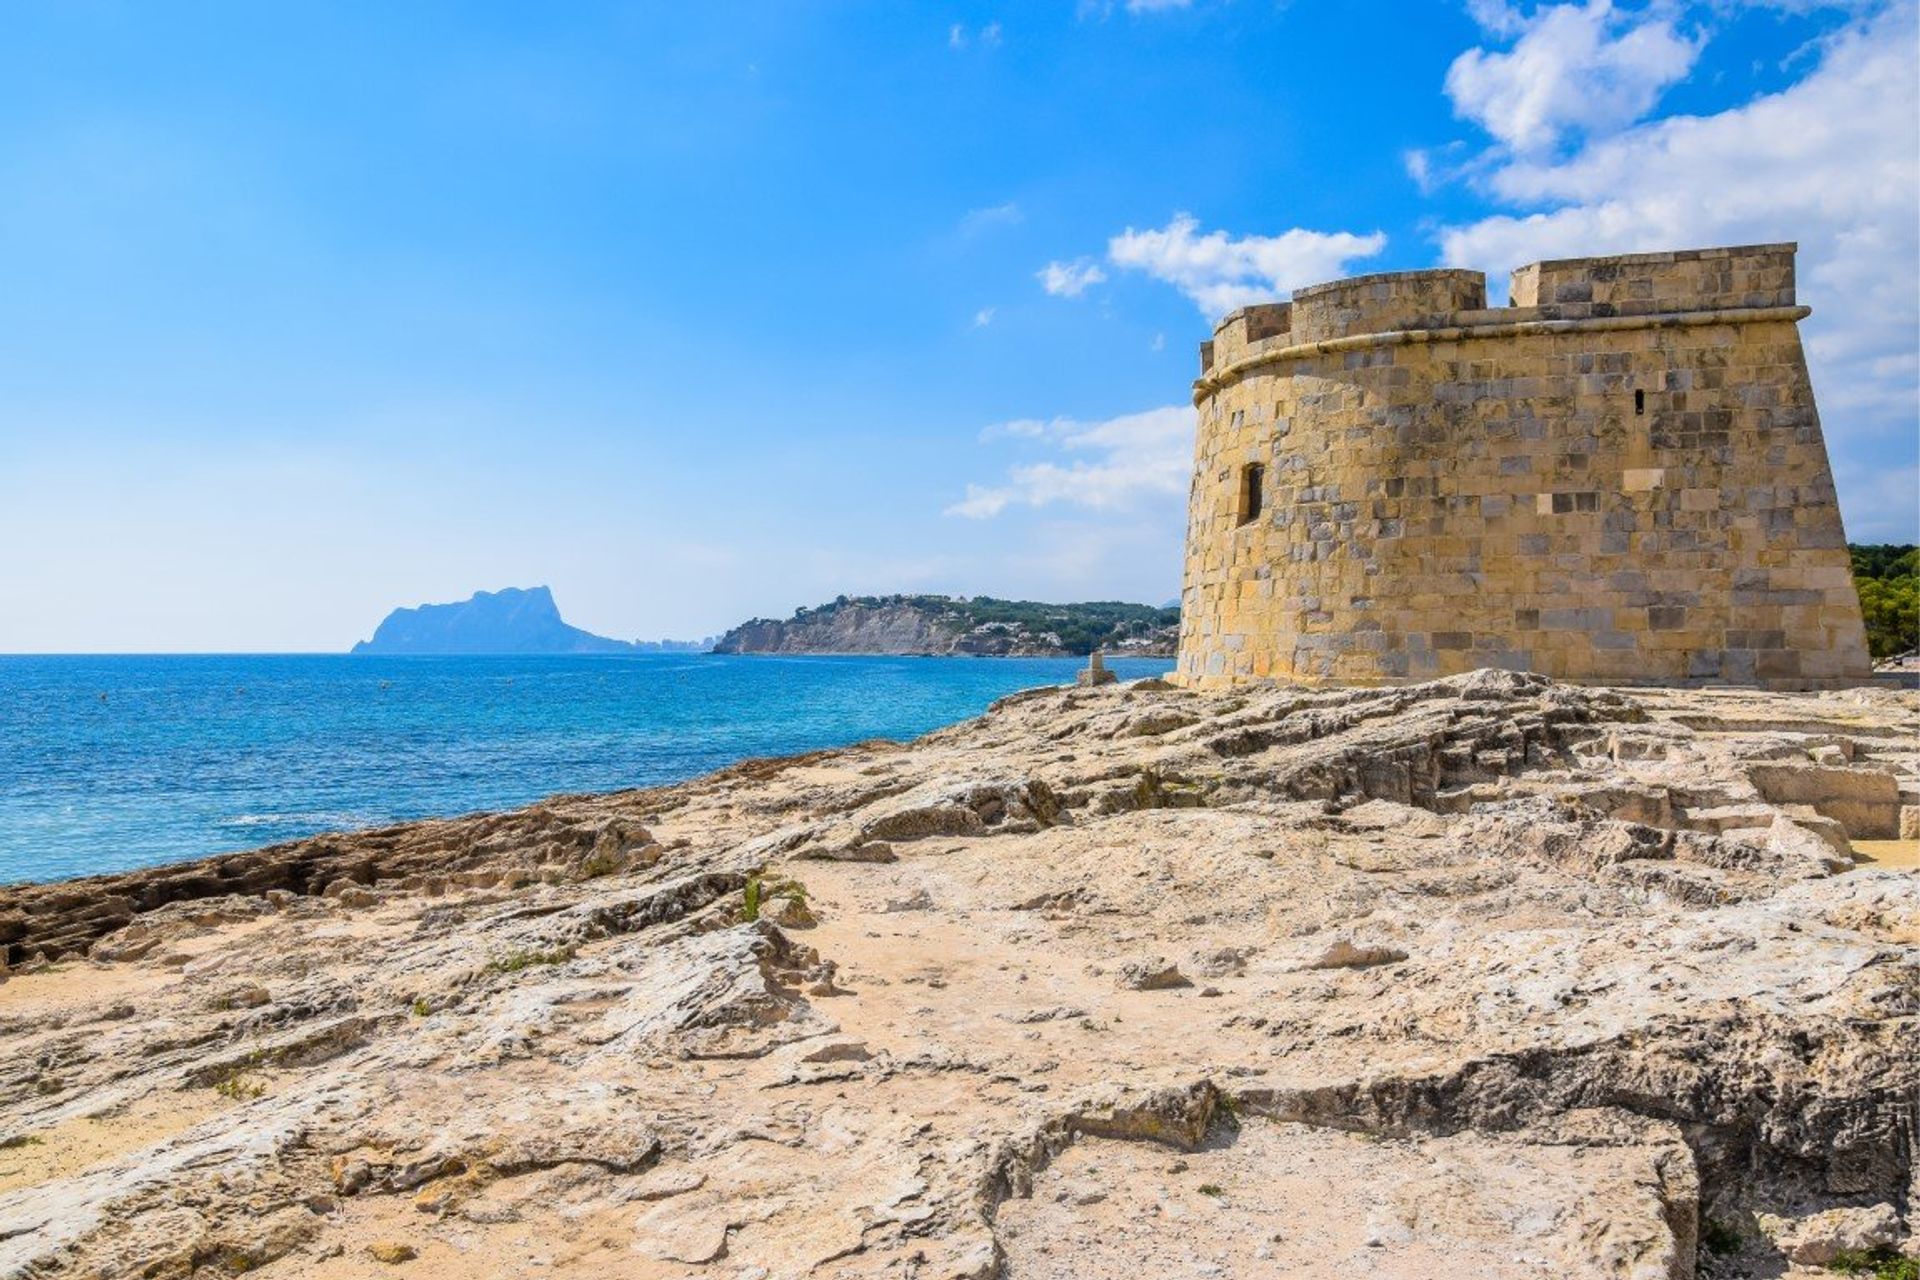 18th century Moraira Castle with Calpe's natural park Penon de Ifach in the distance